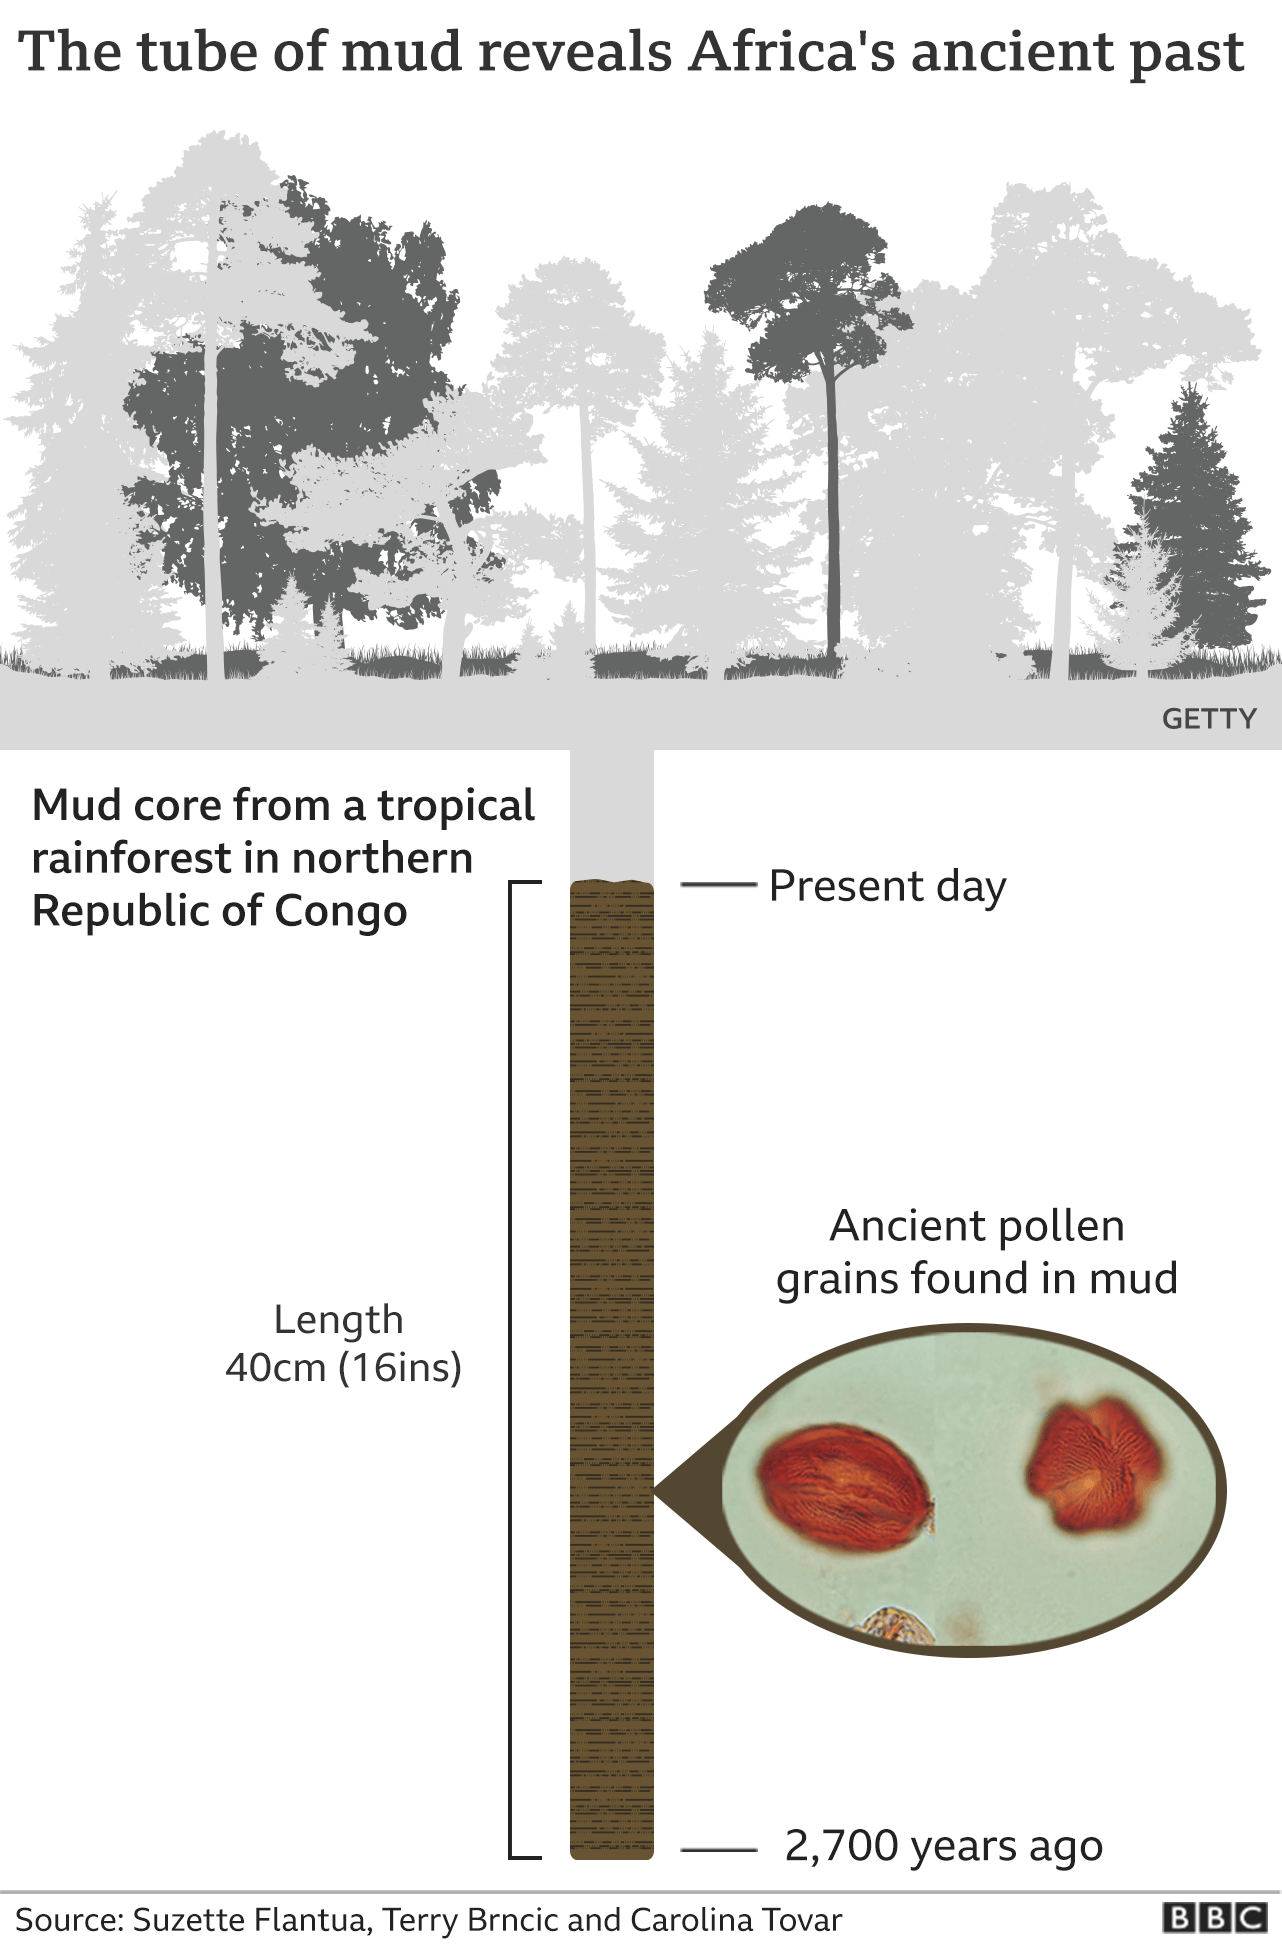 Graphic: How a tube of mud revealed Africa's ancient past